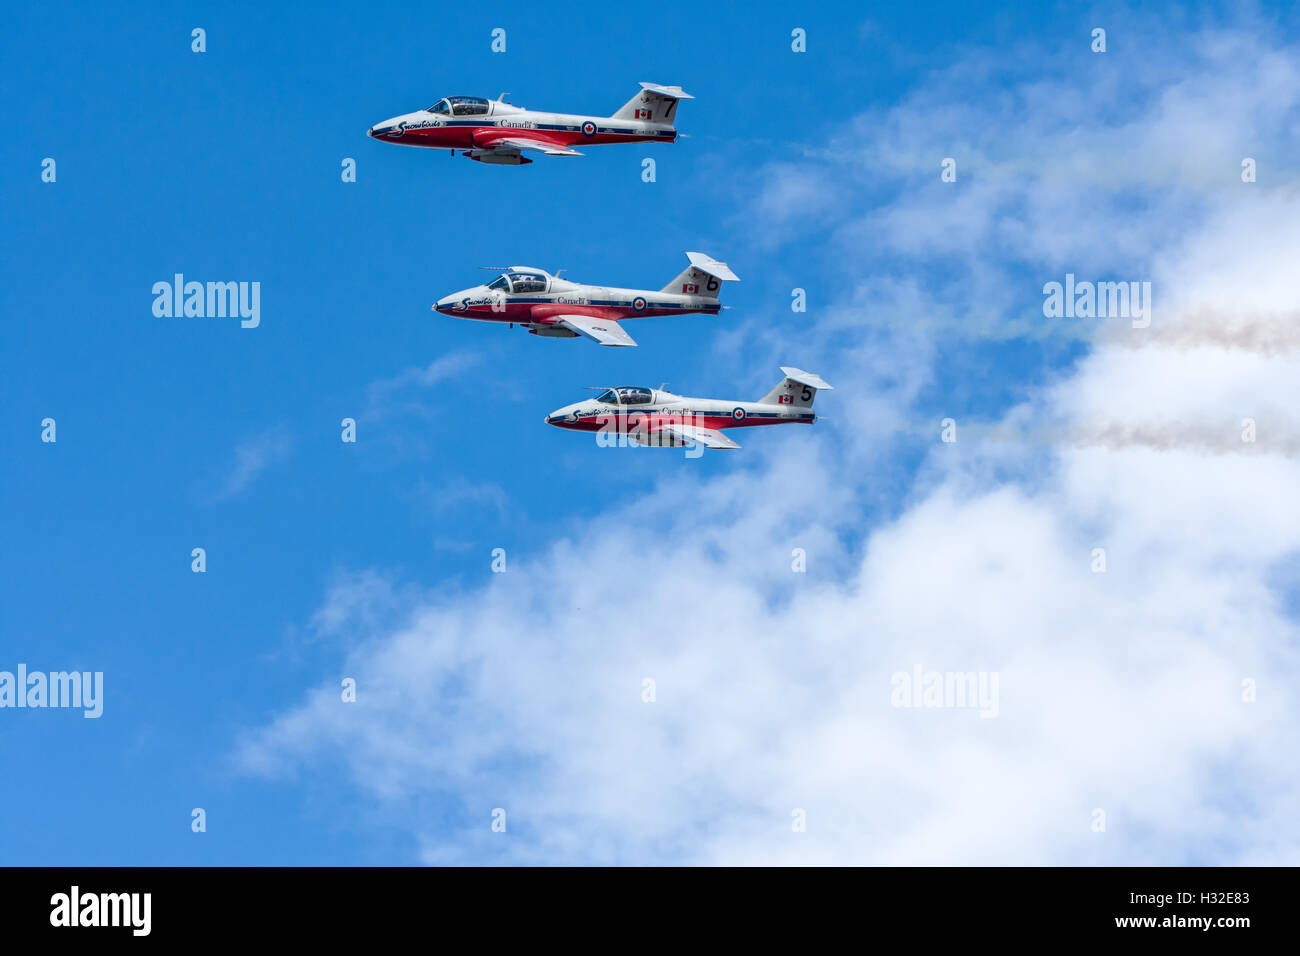 Canada SnowBirds 3 jets flying in formation Stock Photo